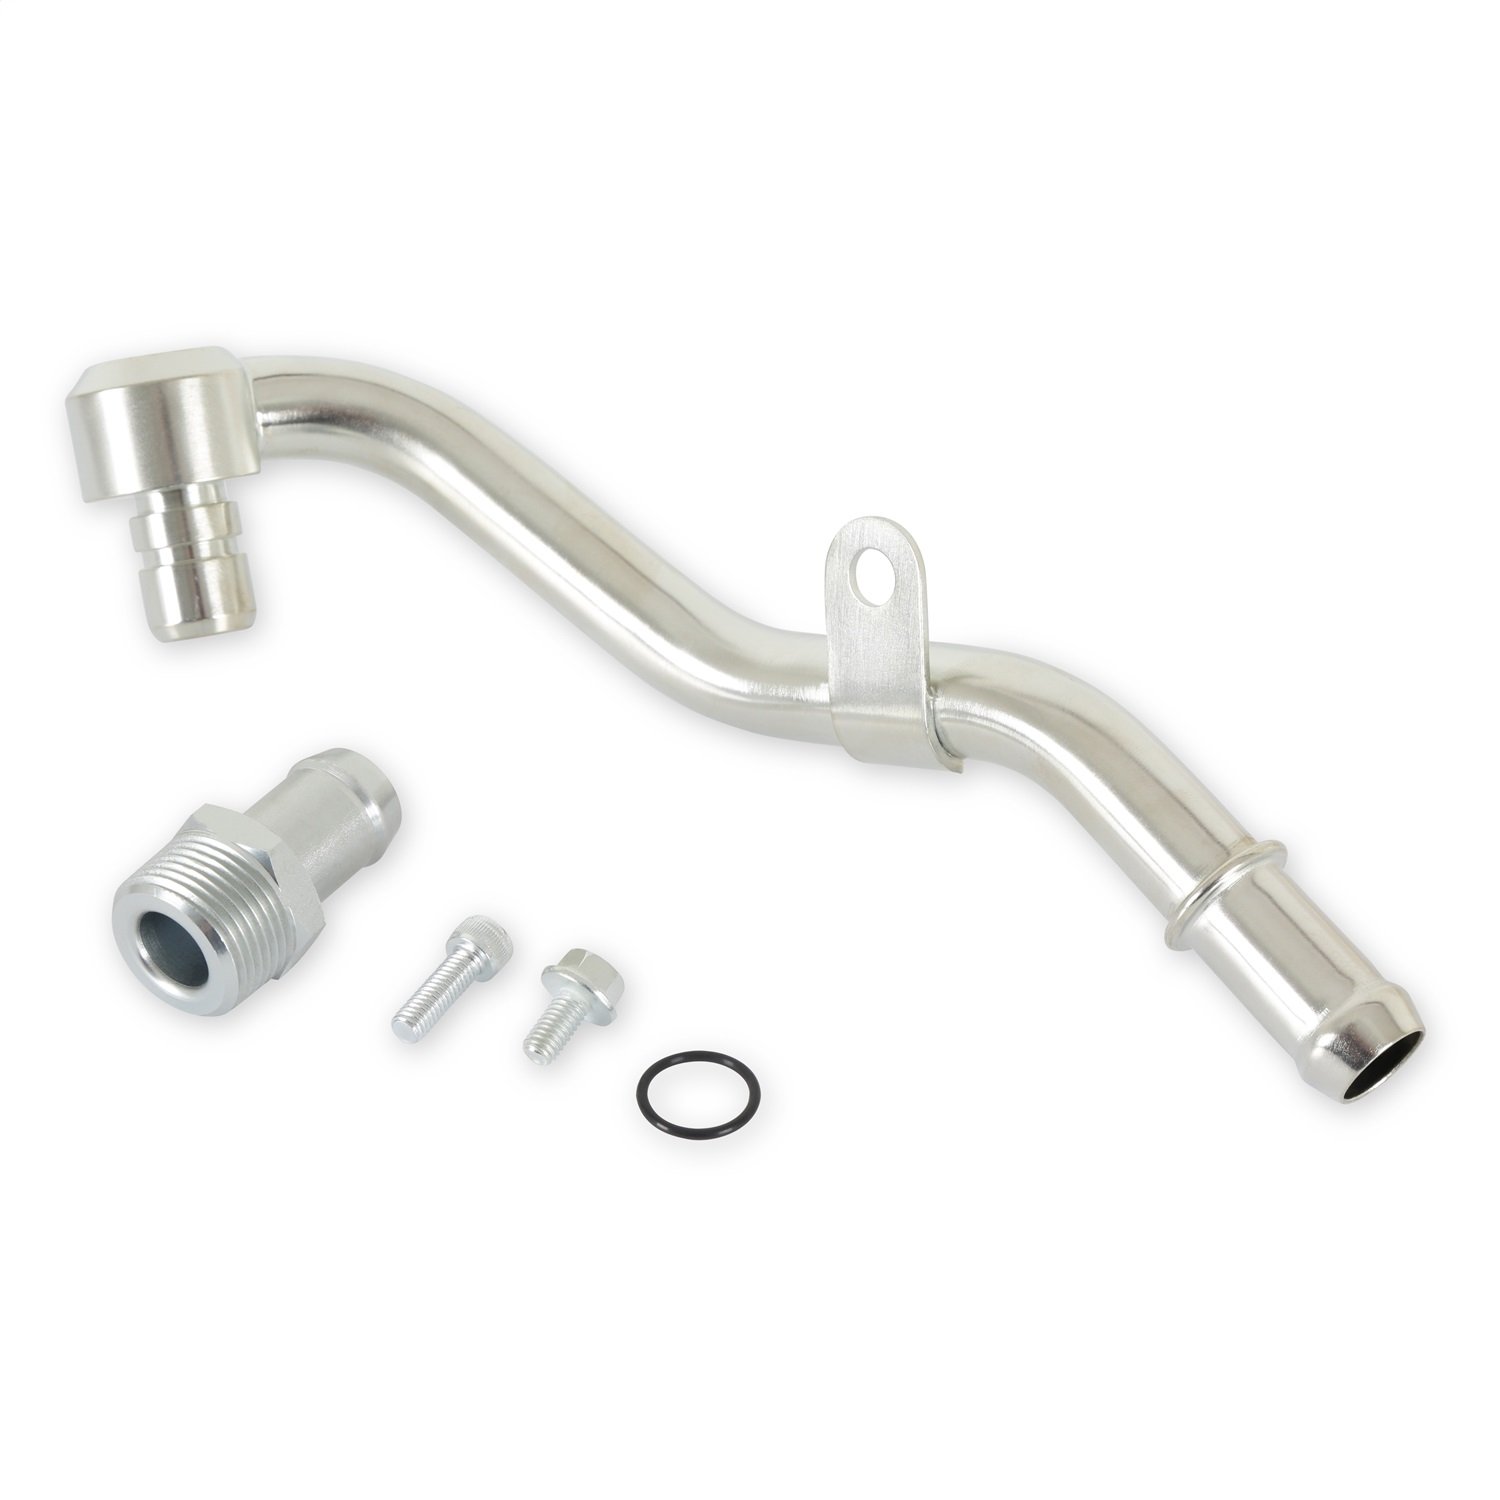 300-901 Heater Hose Adapter Kit for Ford 7.3L